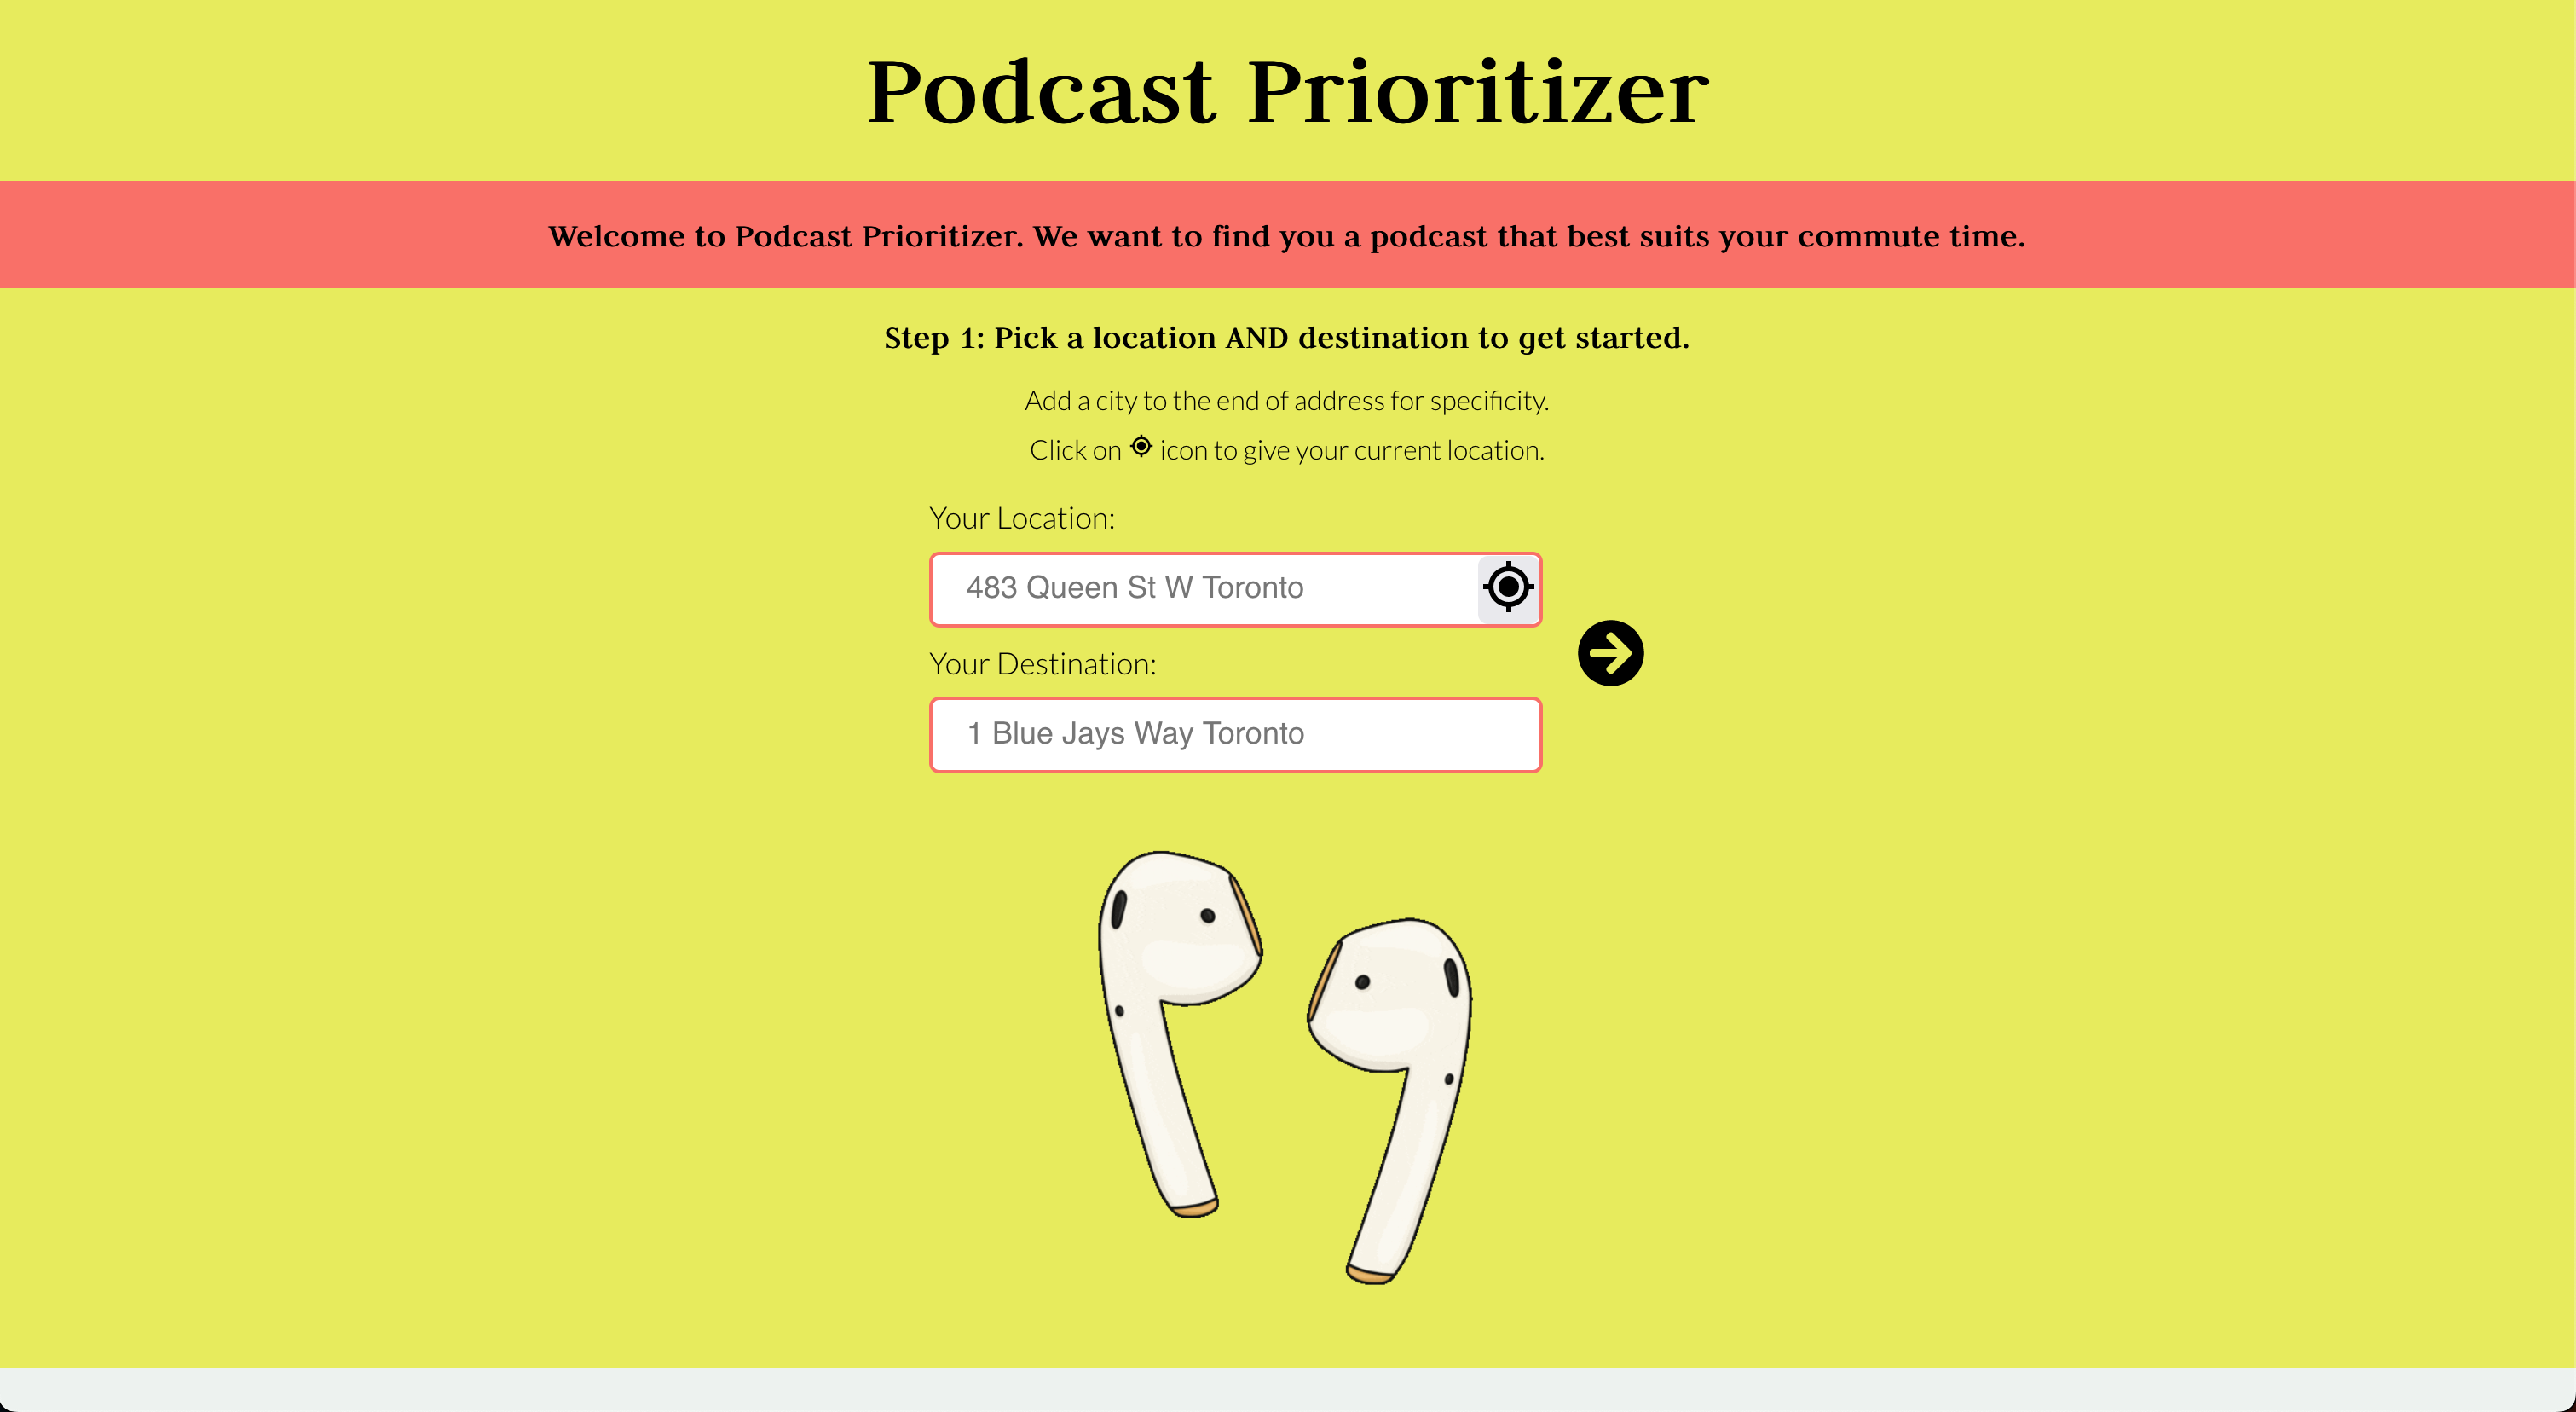 Website with location and destination inputs to help select podcasts